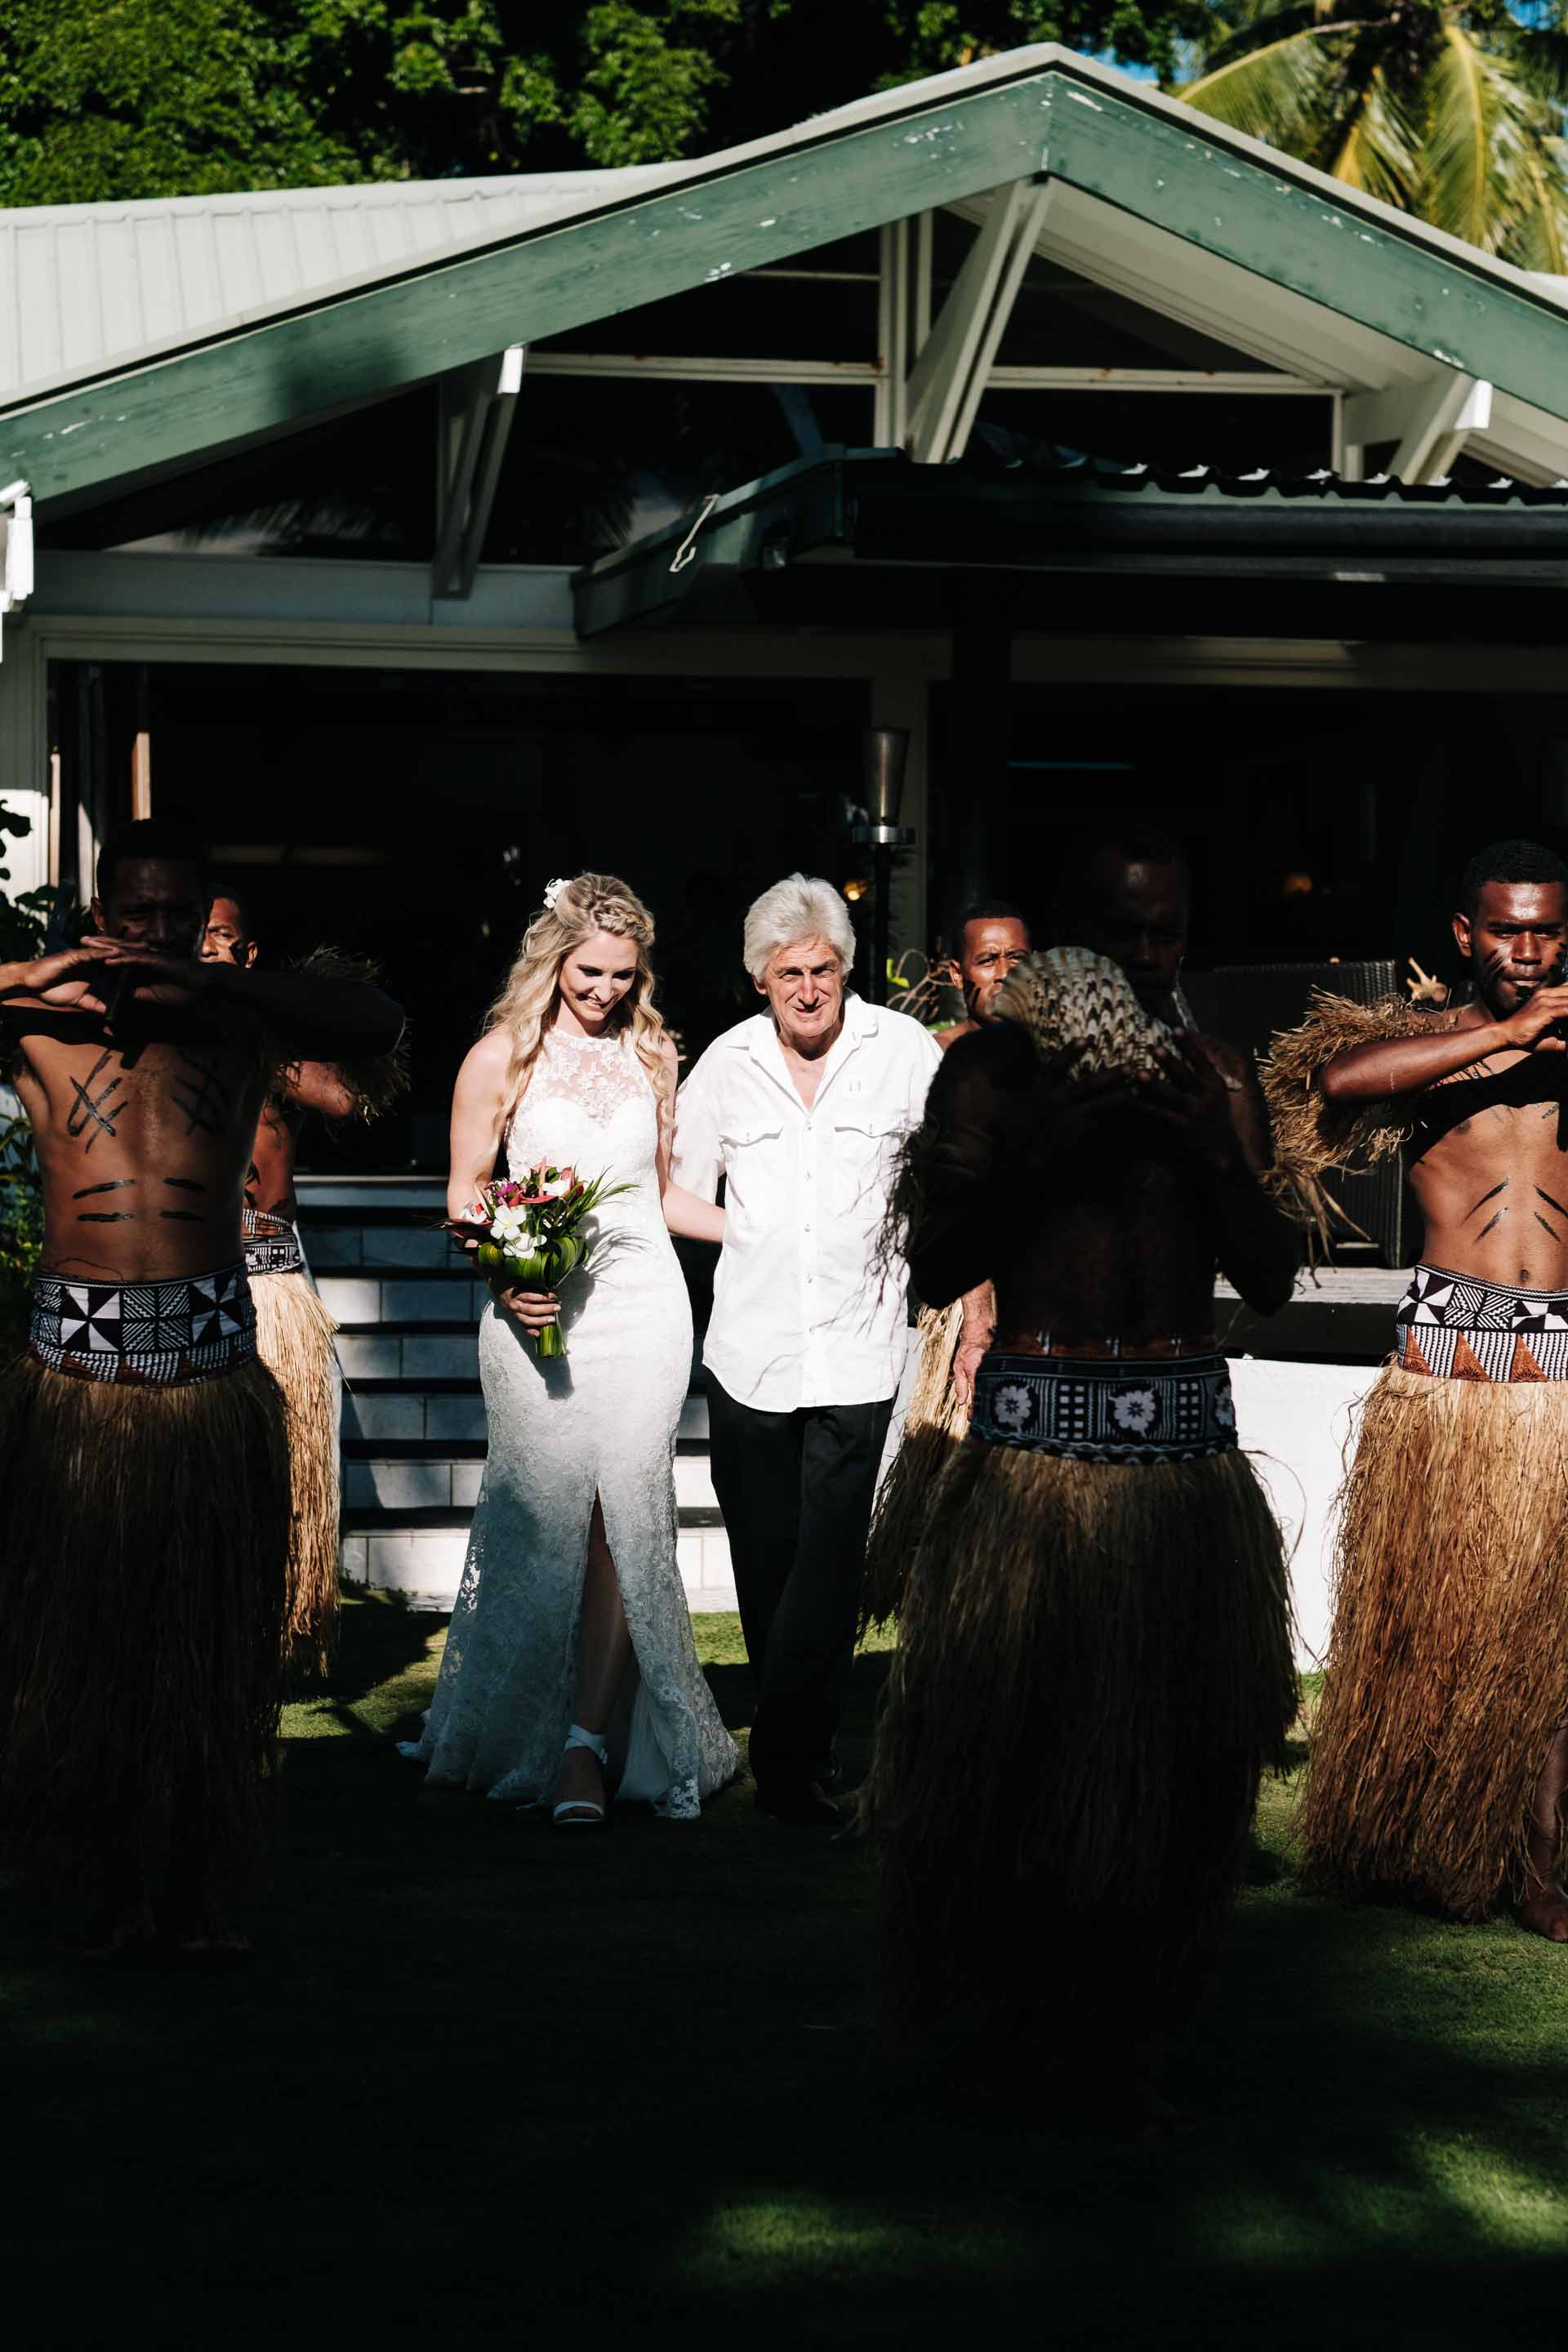 the bride and her father walking down the aisle escorted by Fijian warriors to the wedding arch